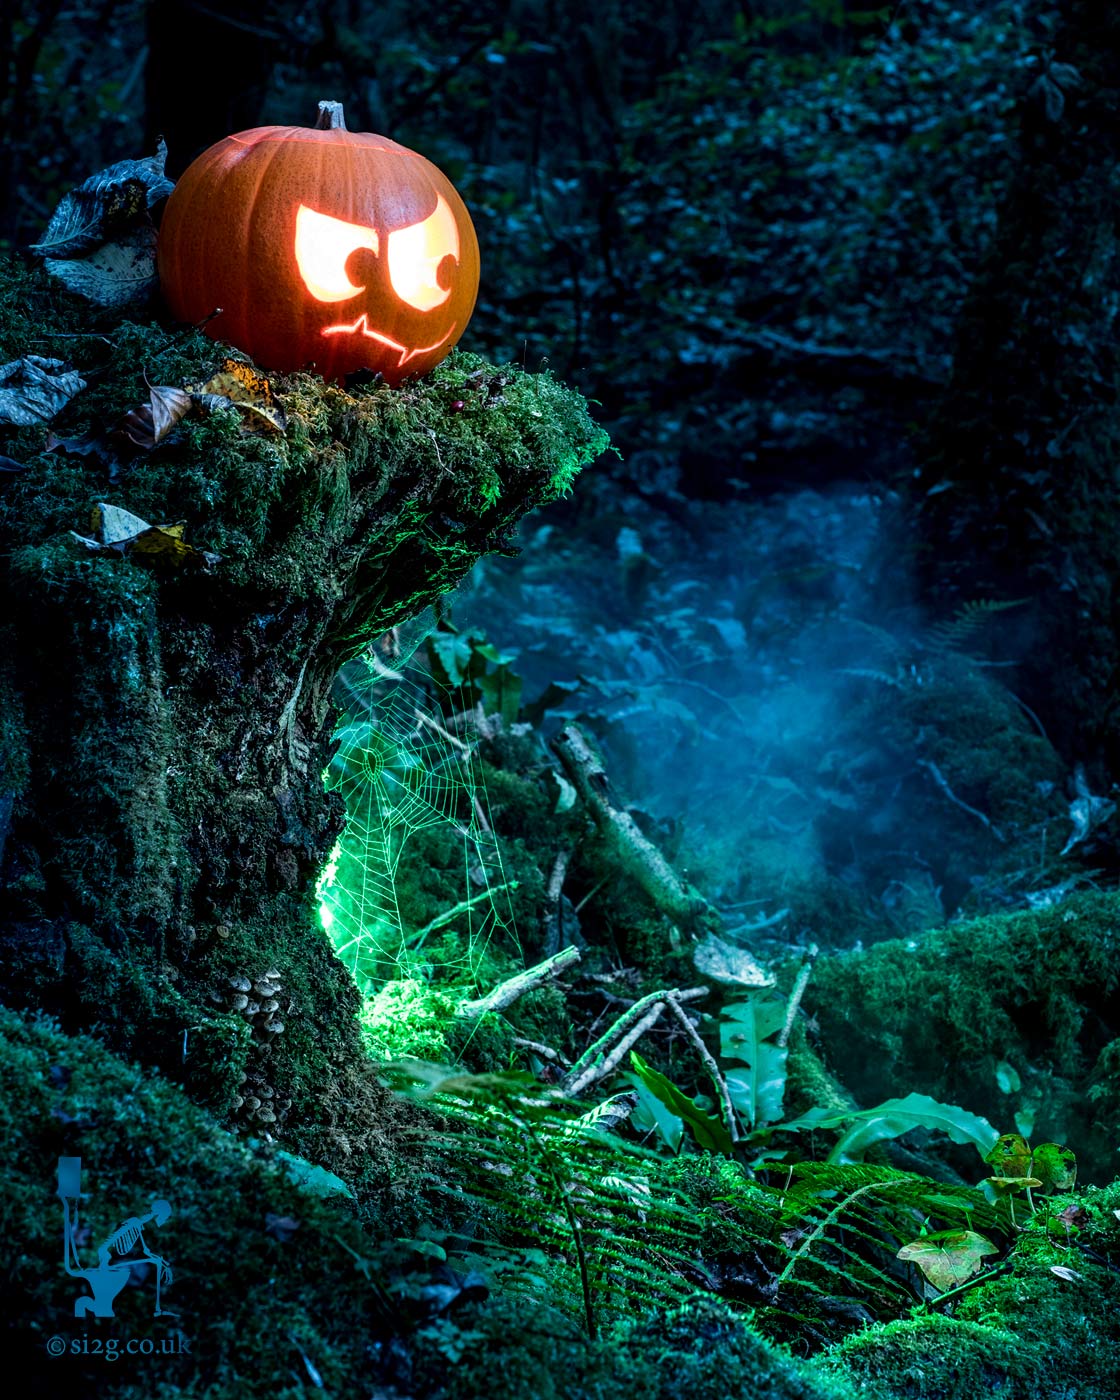 Seasonal Branding - Halloween - We revisited the Halloween Pumpkin Jackolantern in the forest idea.  Choosing to shoot in daylight this time we found we were able to achieve a spooky evening look much more easily.  Spray mist and remote-controlled speedlights with coloured gels added that cartoon factor we were hoping to achieve.  Needless to say, the client was extremely happy with the results and ran a successful campaign with their company branding.